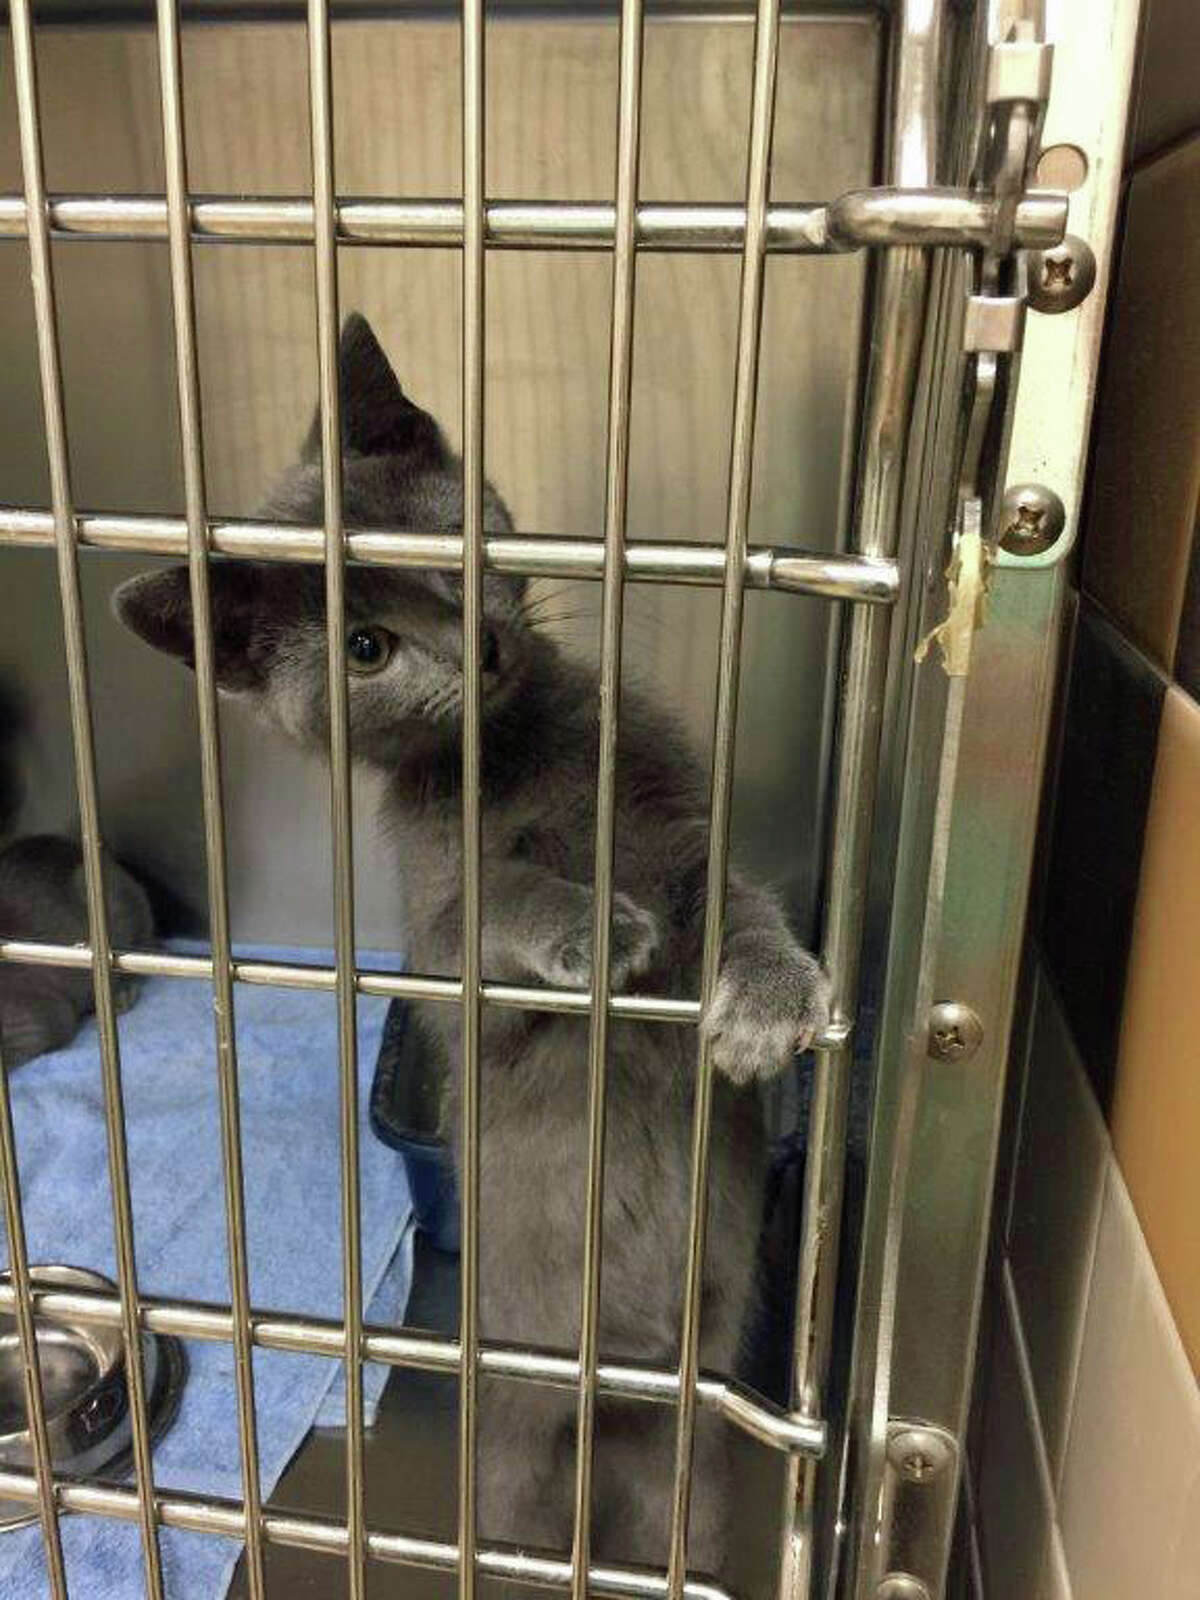 This little kitten was found at the Cos Cob train station and is now being sheltered by Greenwich Animal Control.